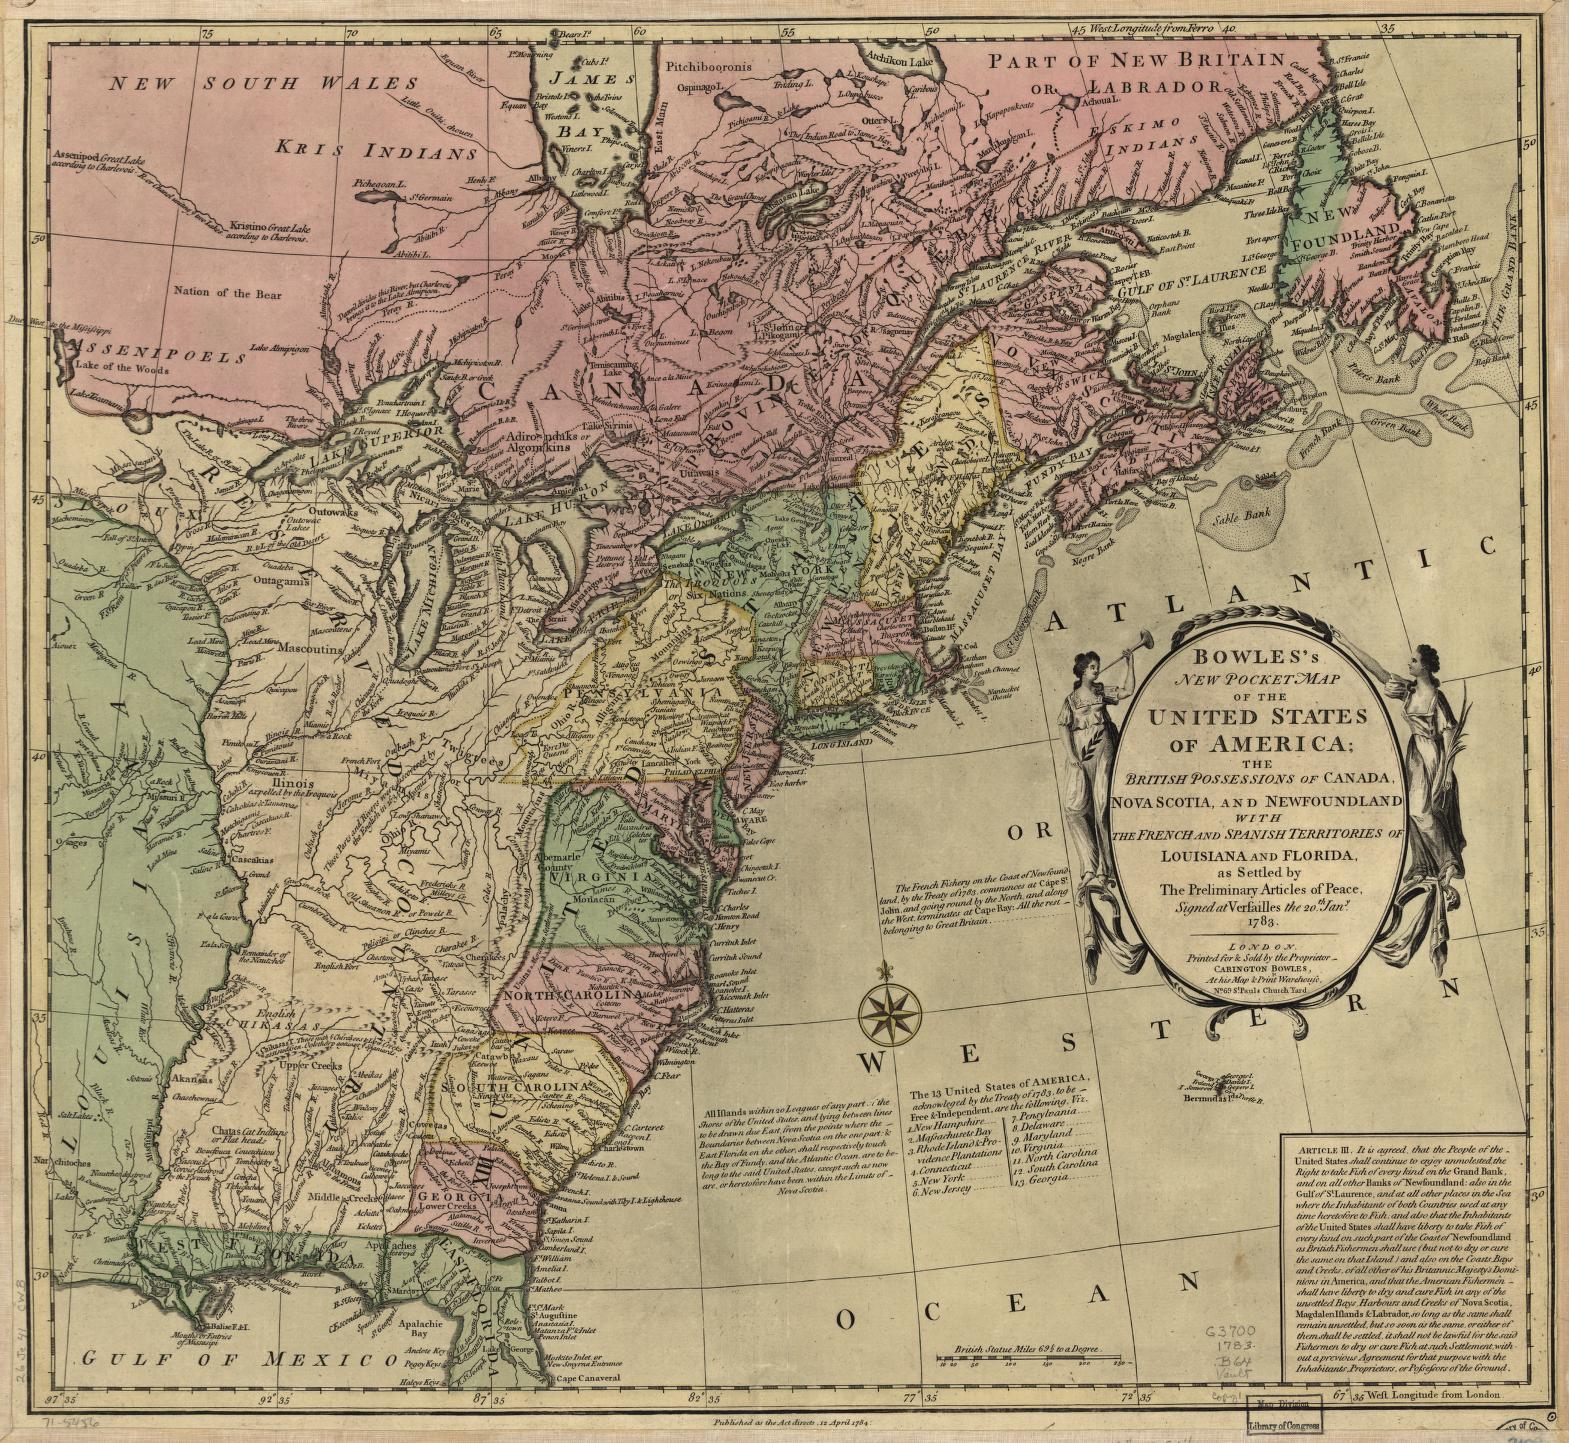 Print map of the eastern half of the United States with part of Canada; states, territories, and foreign nations are individually colored